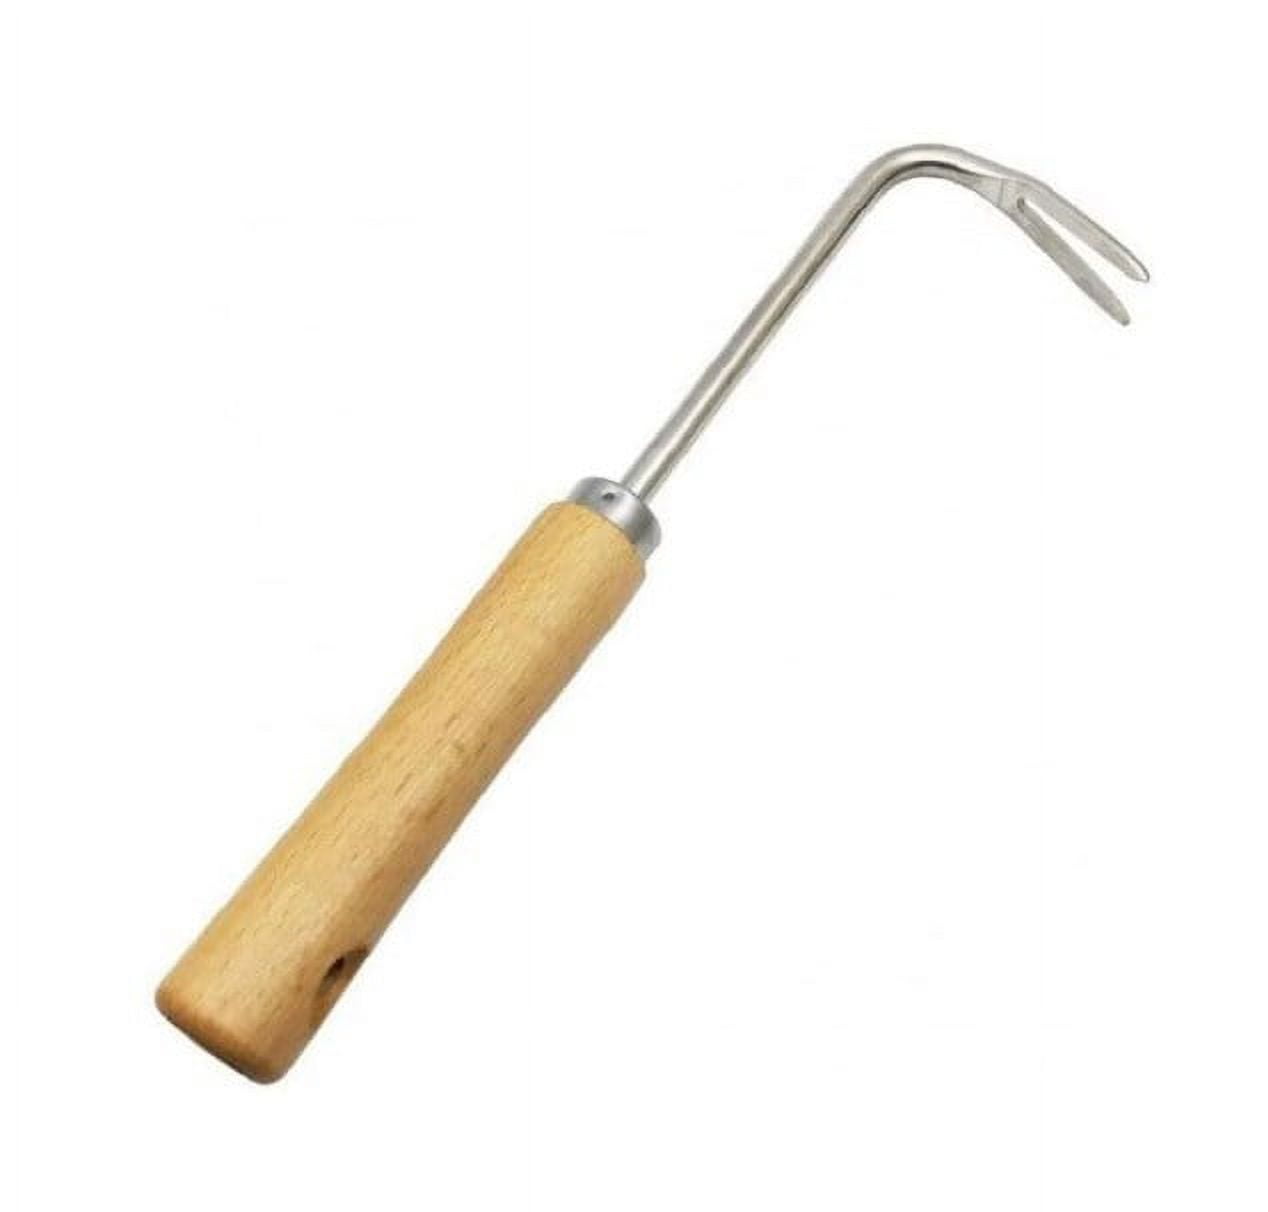  Grass Weeding Hook Root Remover Wood-Handled Bonsai Hook for Stubborn  Grass Garden Plant Weeding Tool Loose Soil V-Hook Dead Grass Remover Tool  Machine Long Handle V-Shaped Design : Patio, Lawn